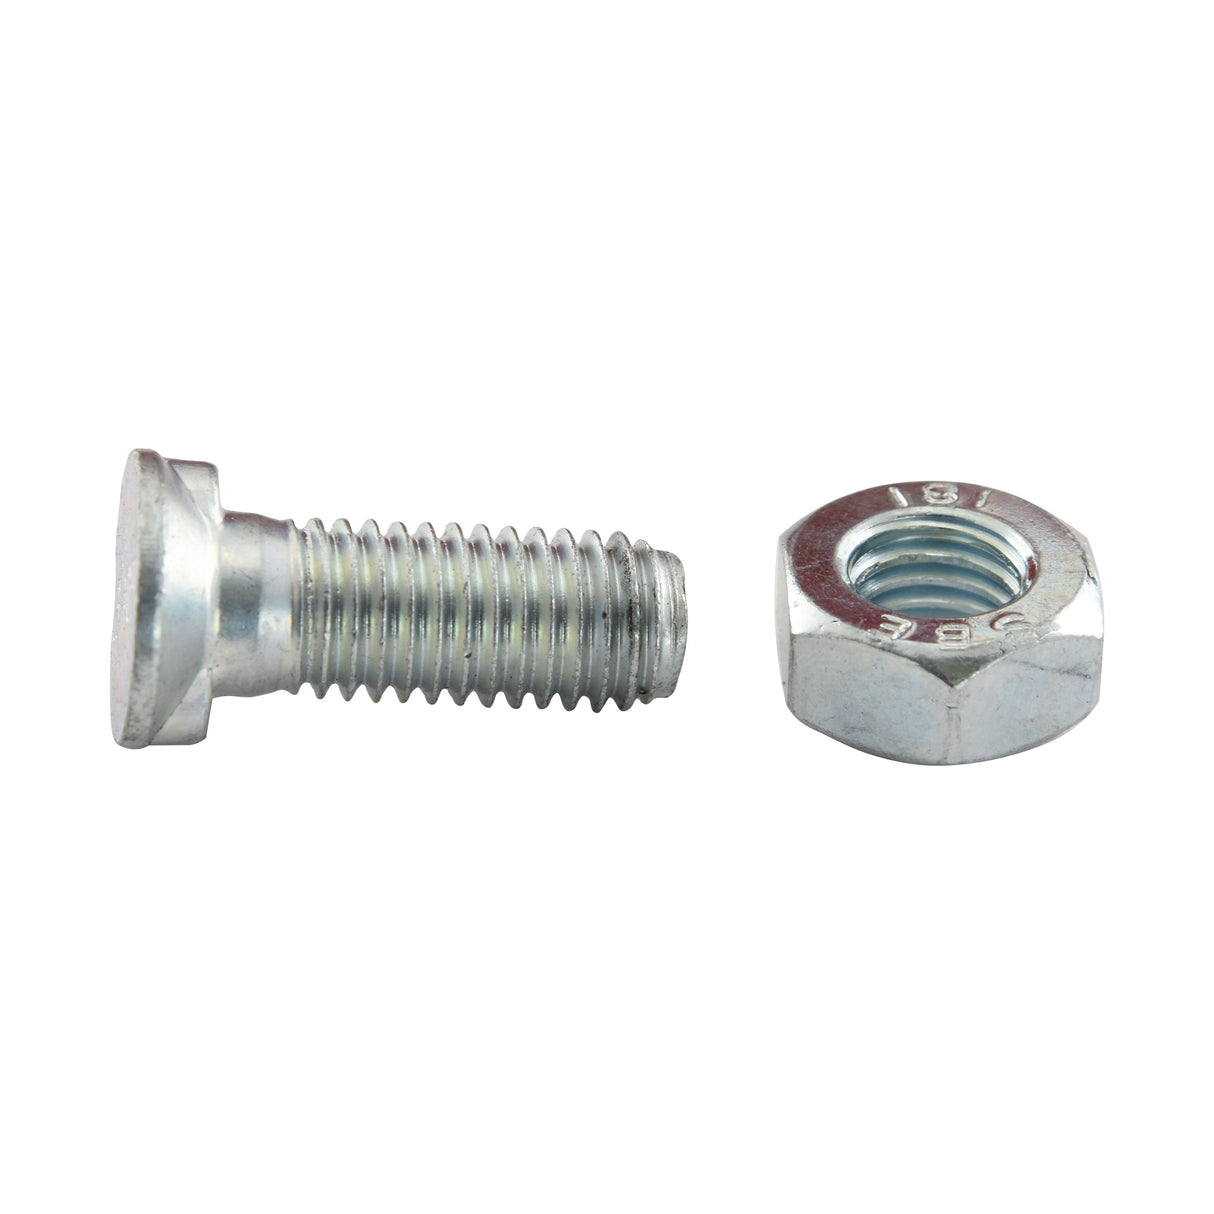 Countersunk Head Bolt 2 Nibs With Nut (TF2E) - M12 x 40mm, Tensile strength 8.8 (25 pcs. Box)
 - S.78766 - Farming Parts